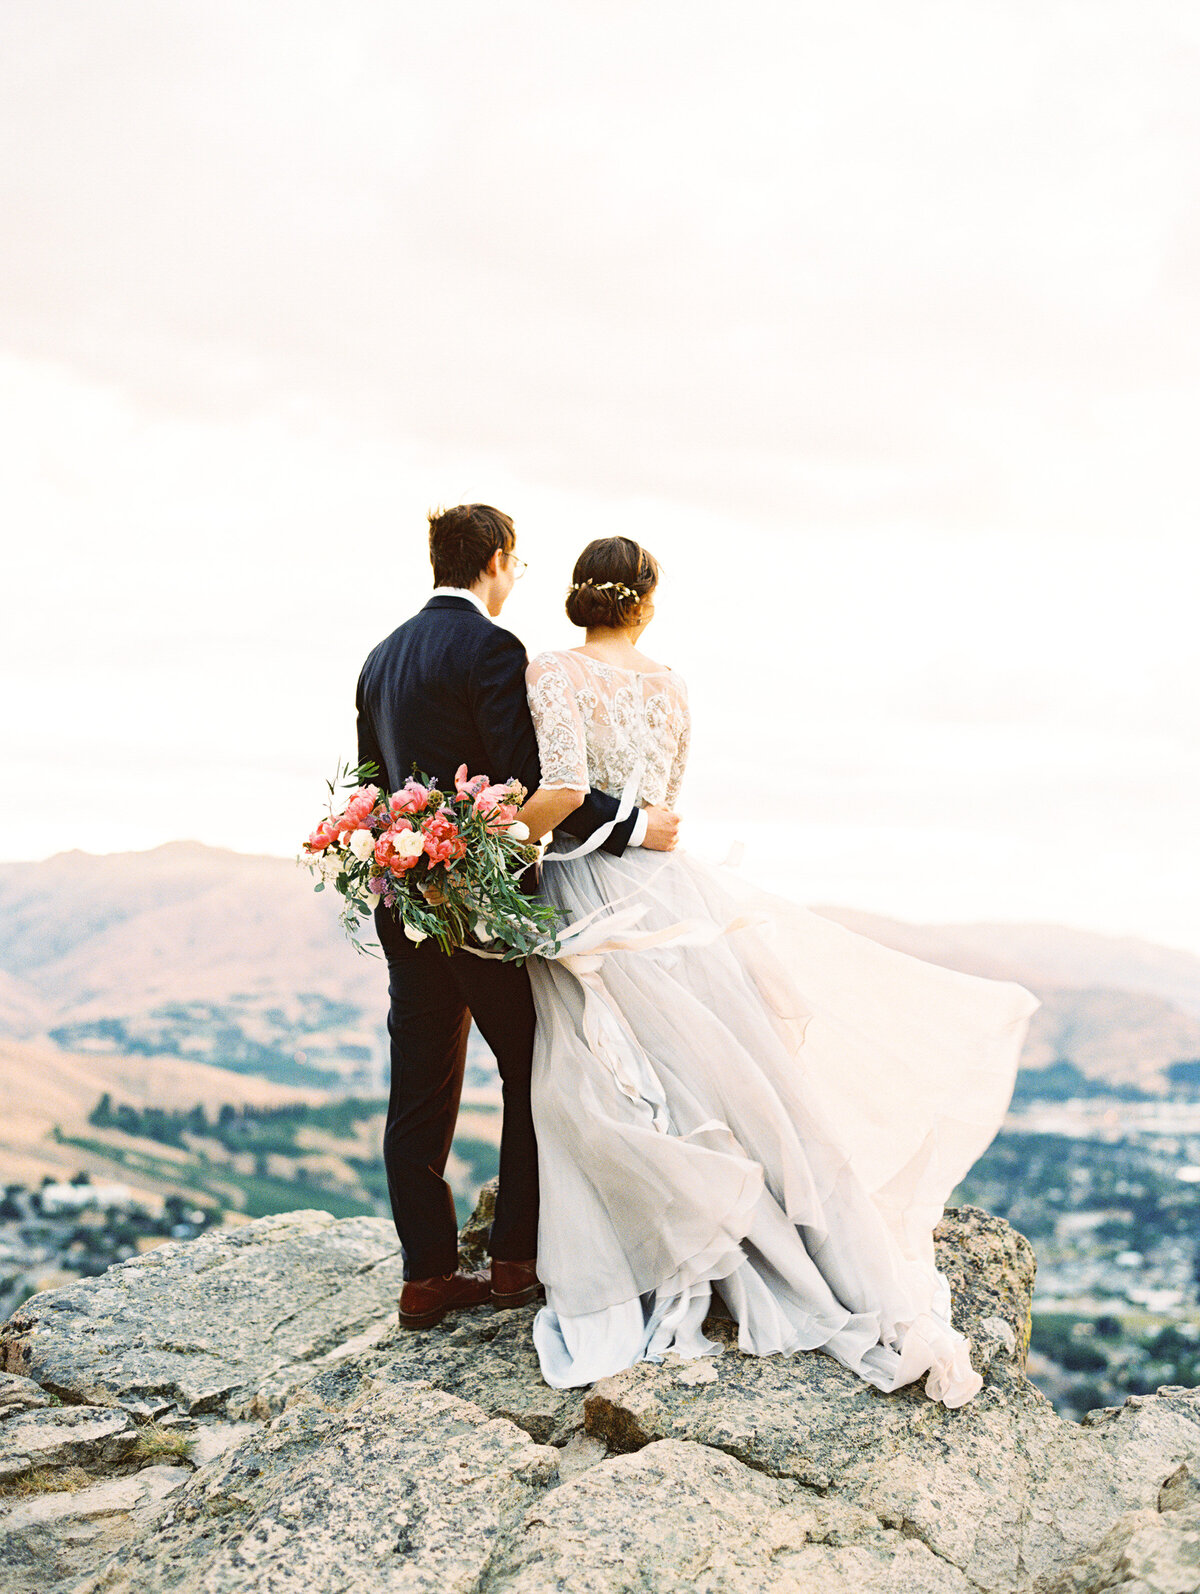 Sunrise Elopement Photos in Leanne Marshall-13